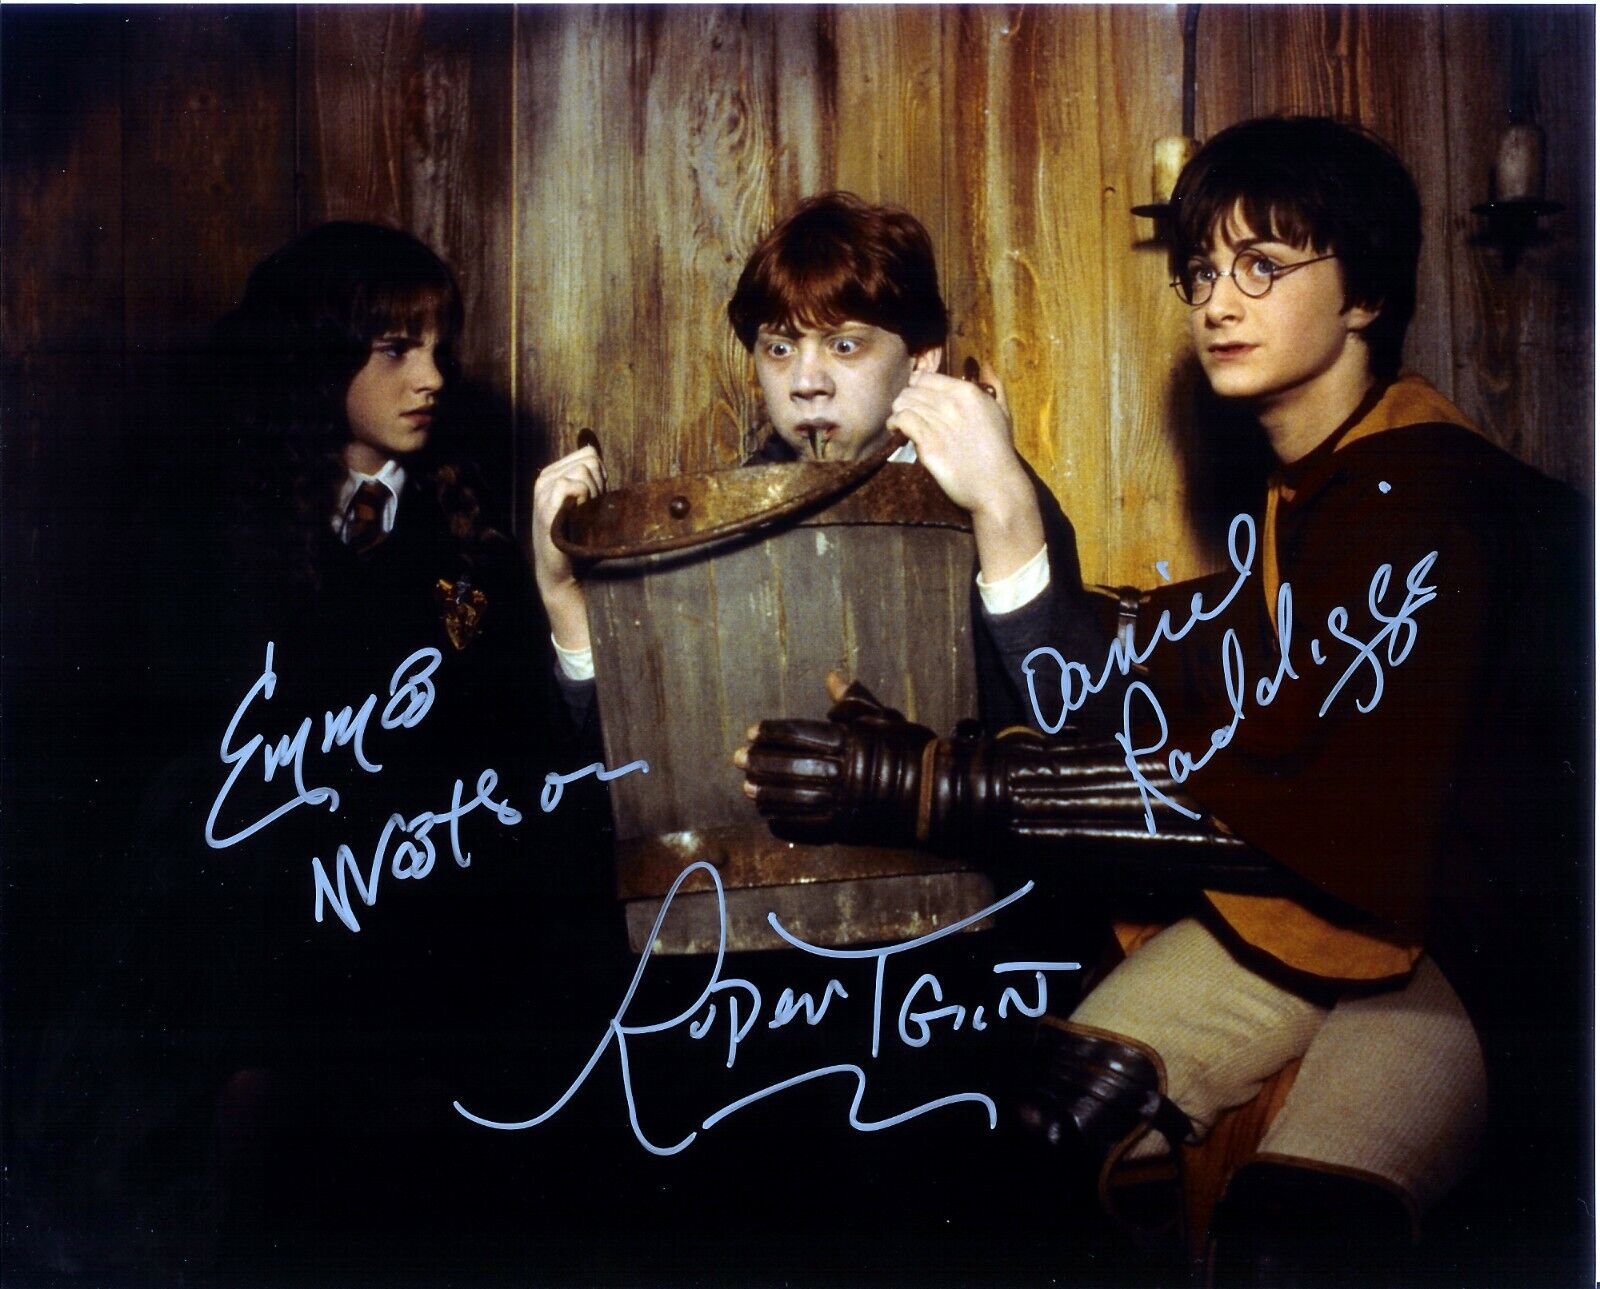 HARRY POTTER - CAST SIGNED Autographed Signed 8x10 Reprint Photo Poster painting #5 !!